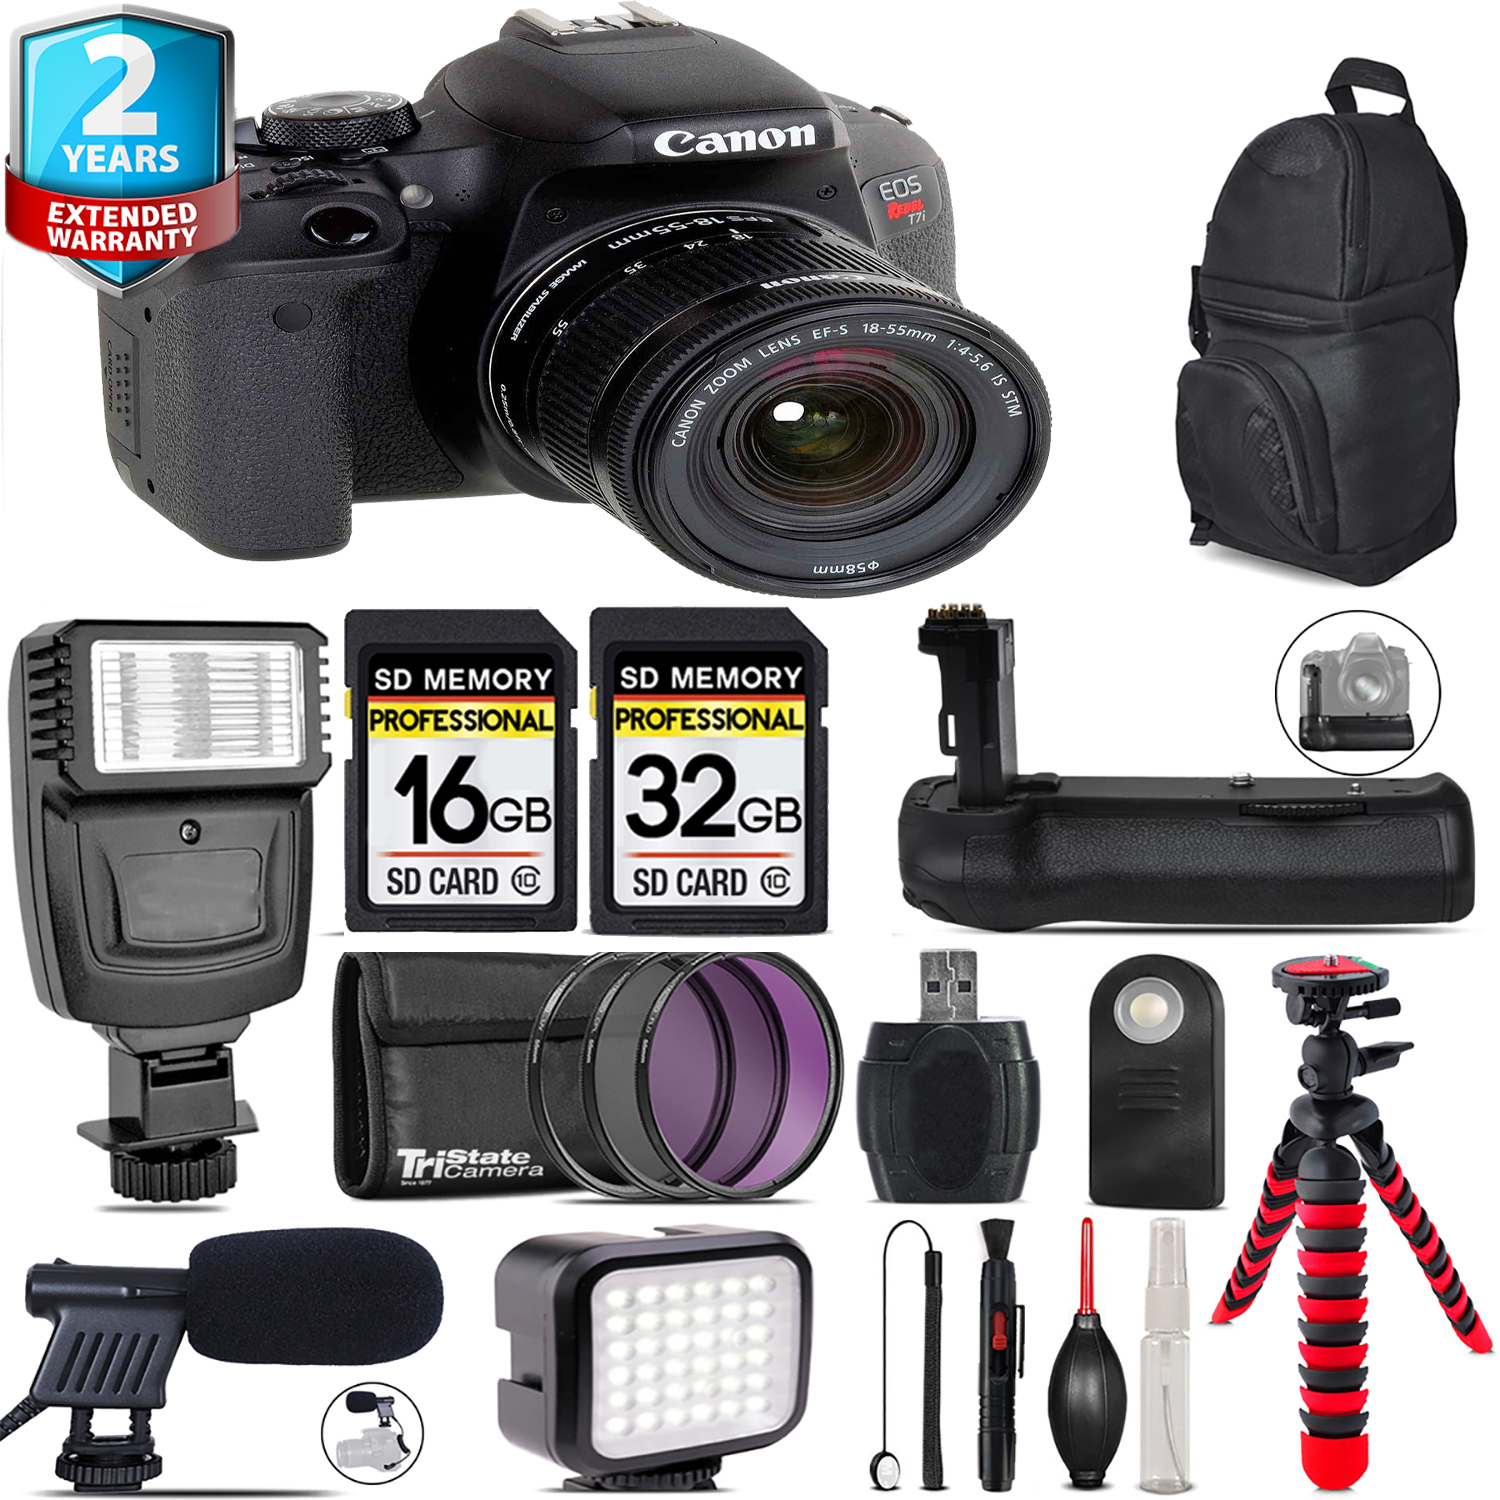 EOS Rebel T7i + 18-55mm IS STM + LED Kit + Mic + Battery Grip + 48GB *FREE SHIPPING*